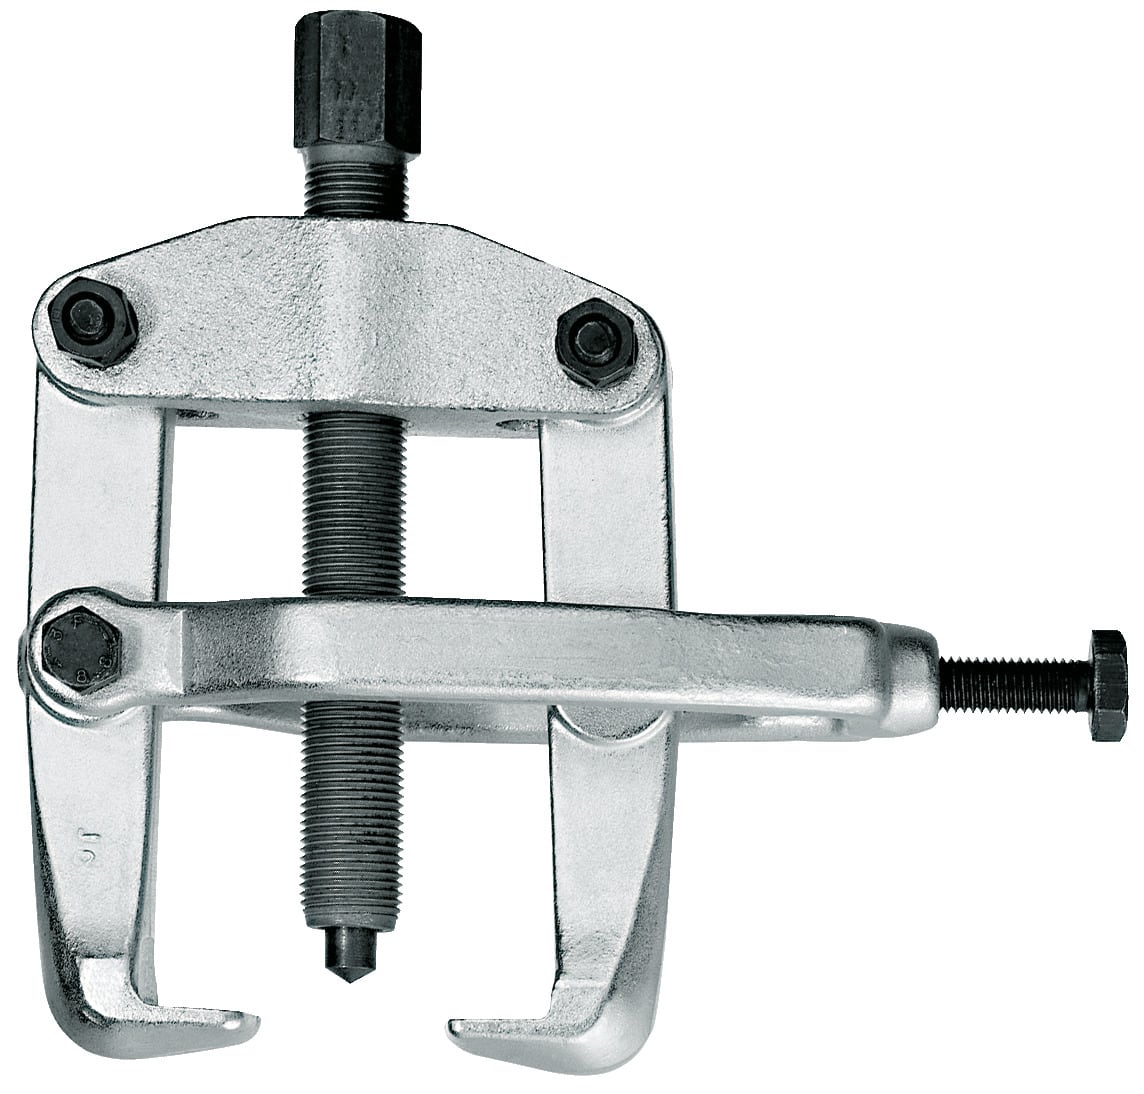 1.20 Puller with clamping yoke